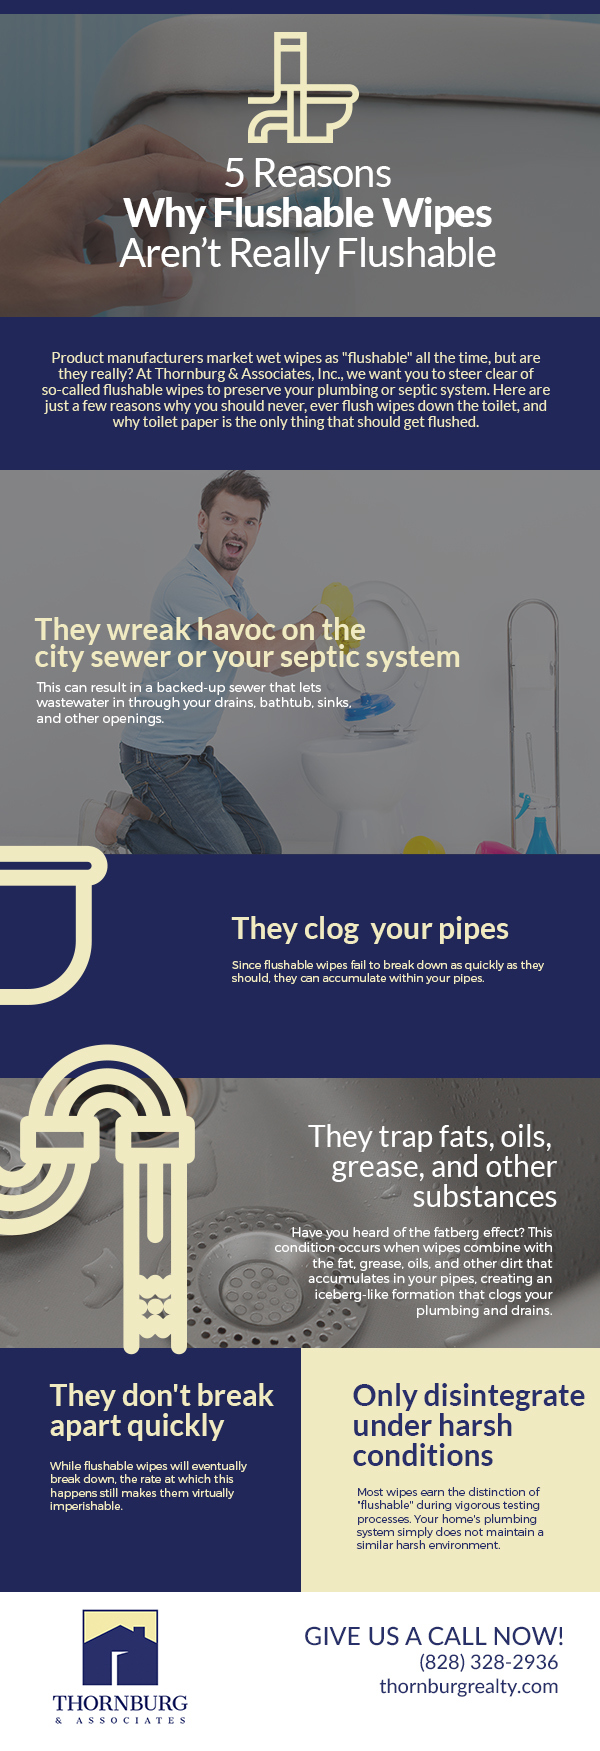 5 Reasons Why Flushable Wipes Aren’t Really Flushable [infographic]